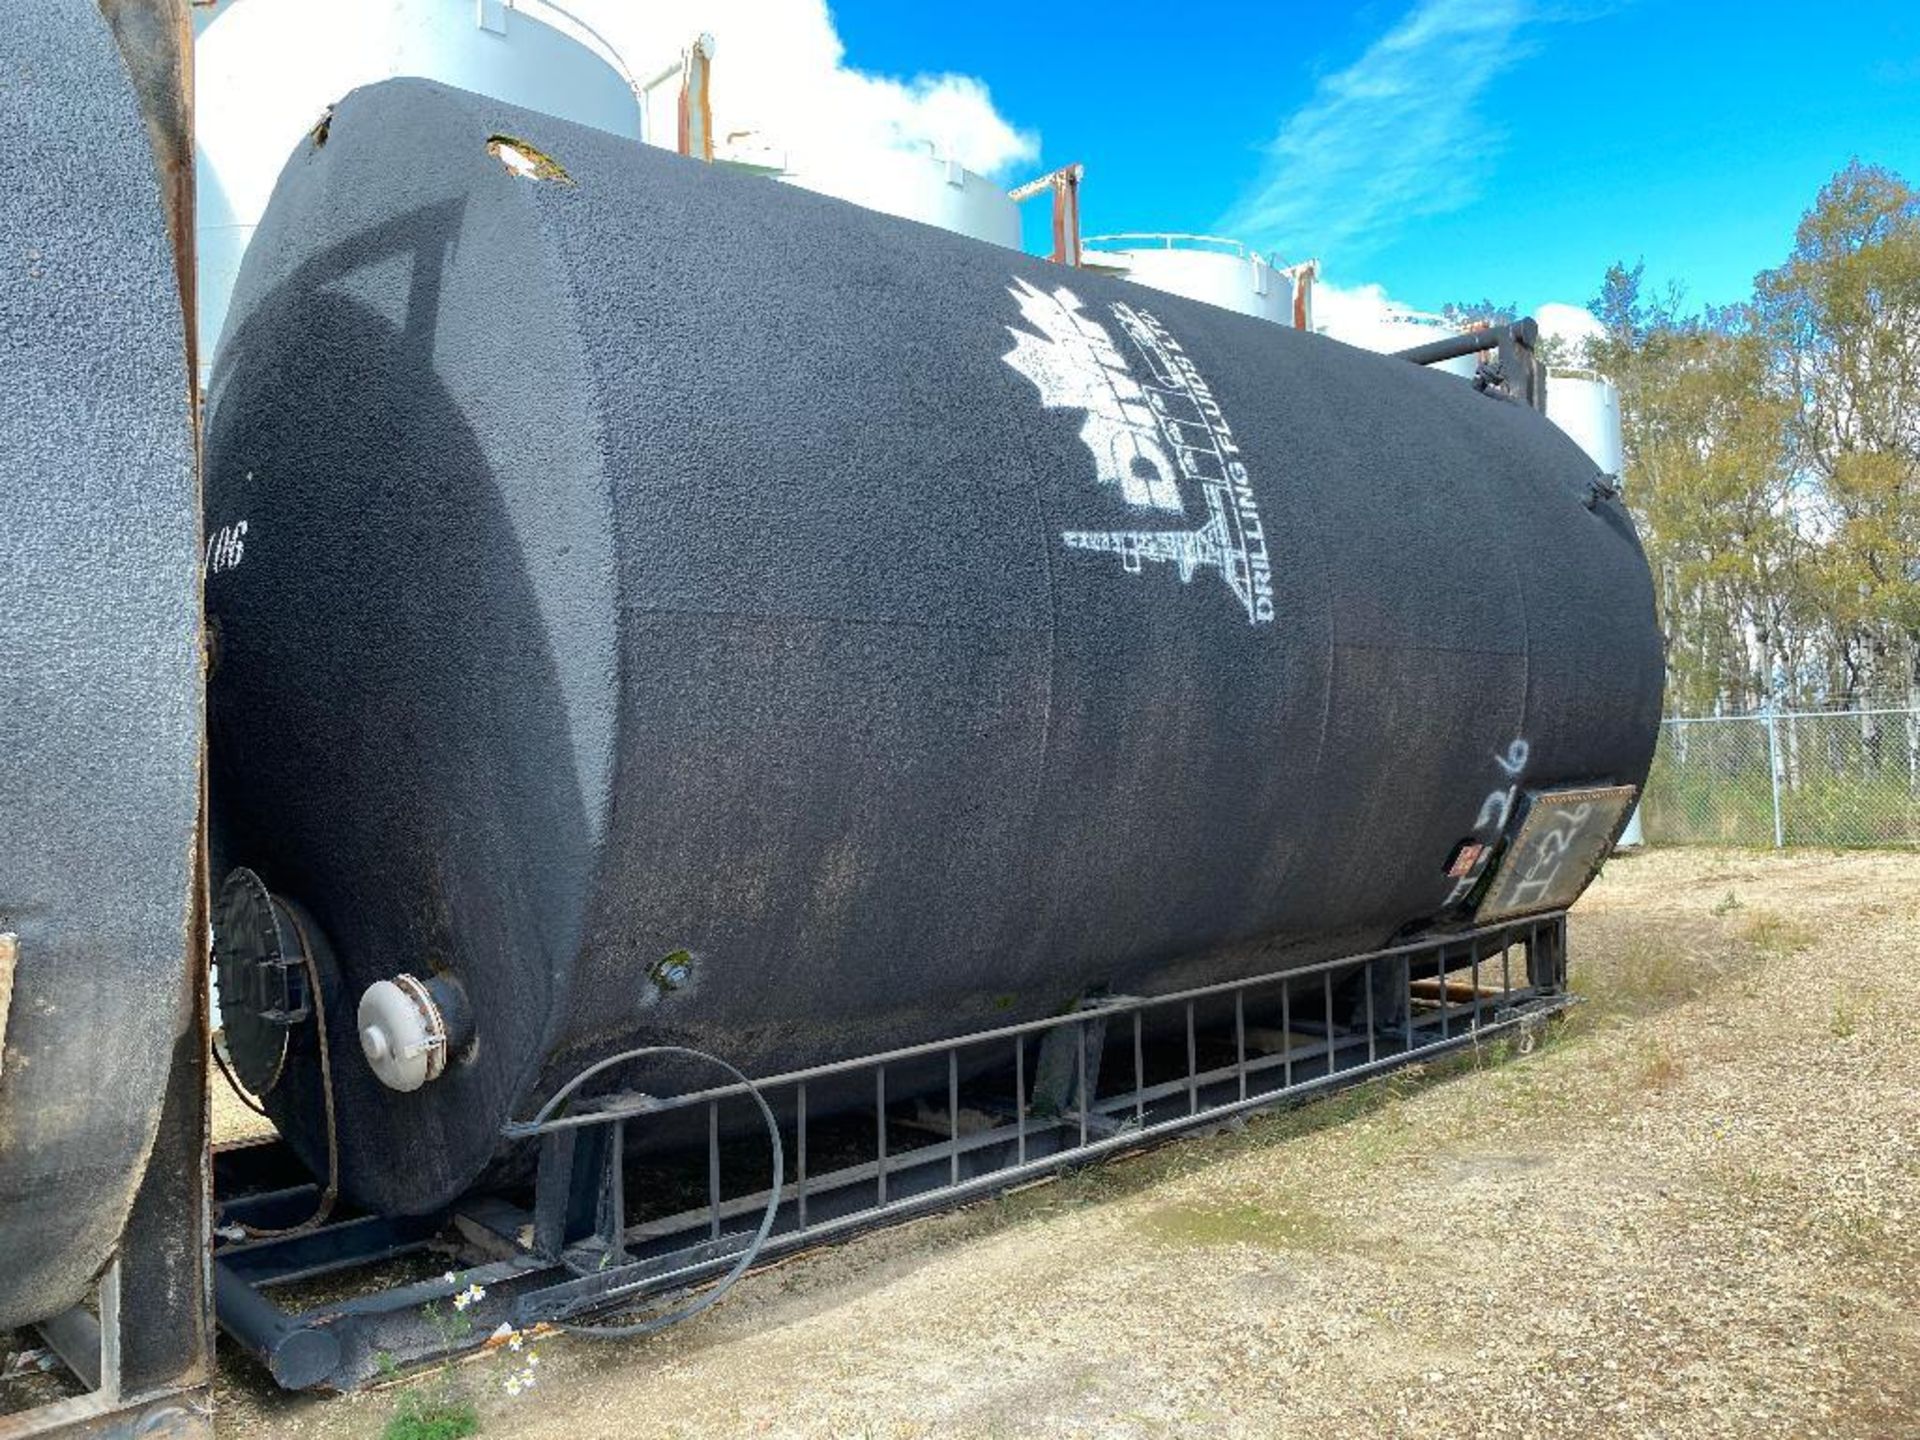 2010 Platinum Energy 20' X 12' 400BBL Insulated Tank Serial: 19050 - Image 3 of 4